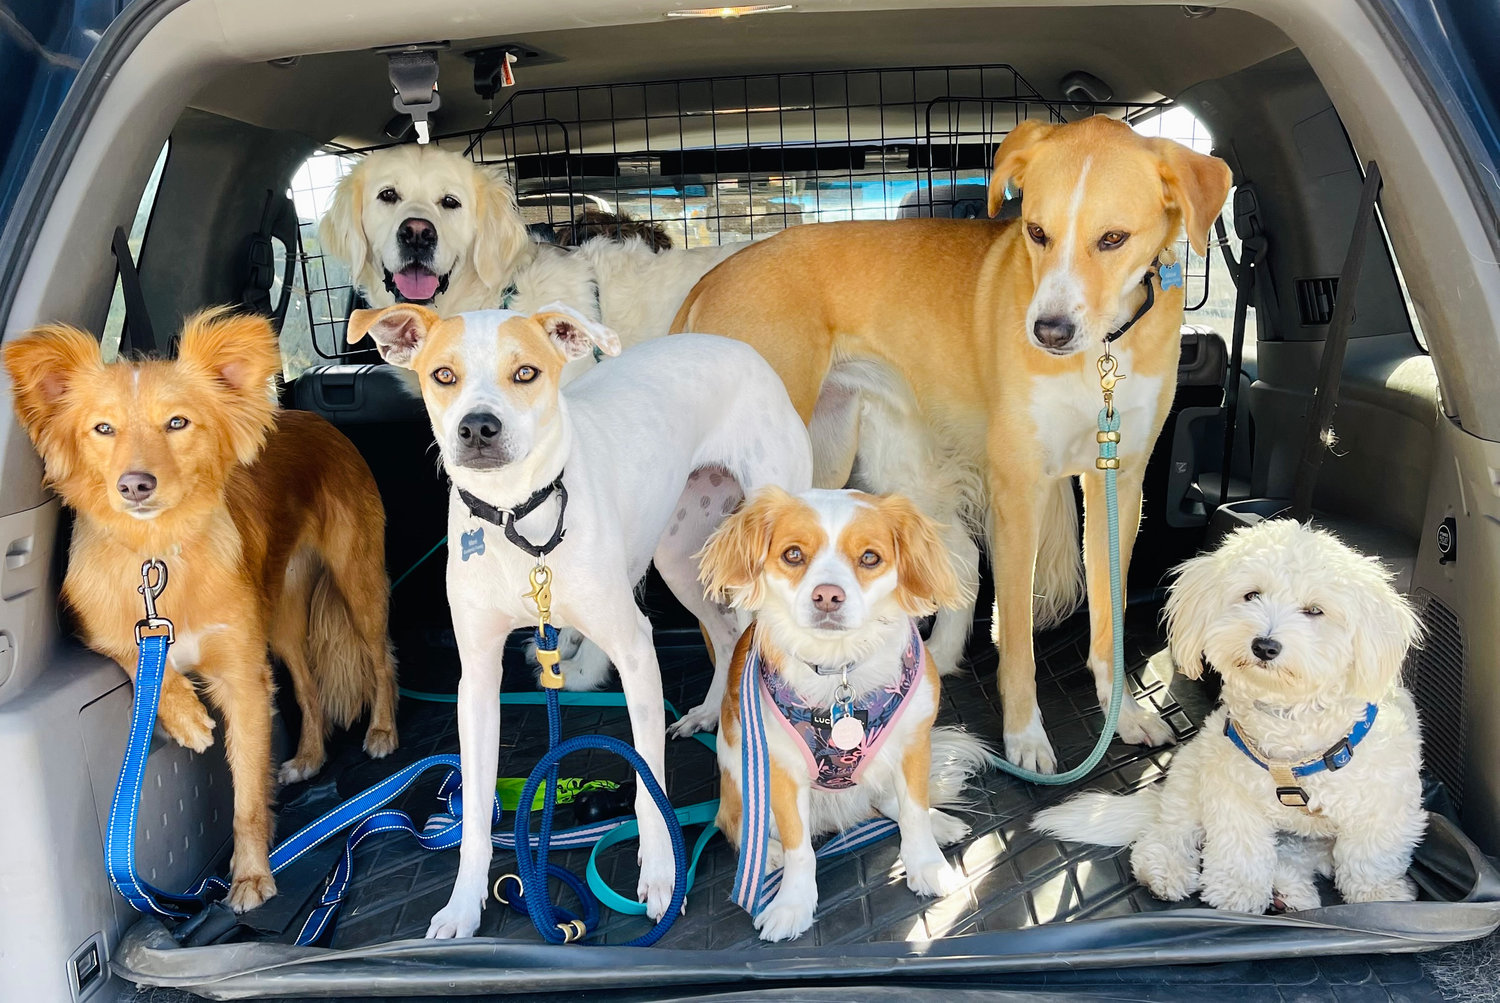 Furry clients hop into Denise DiGangi’s car for a fun-filled Newport day trip